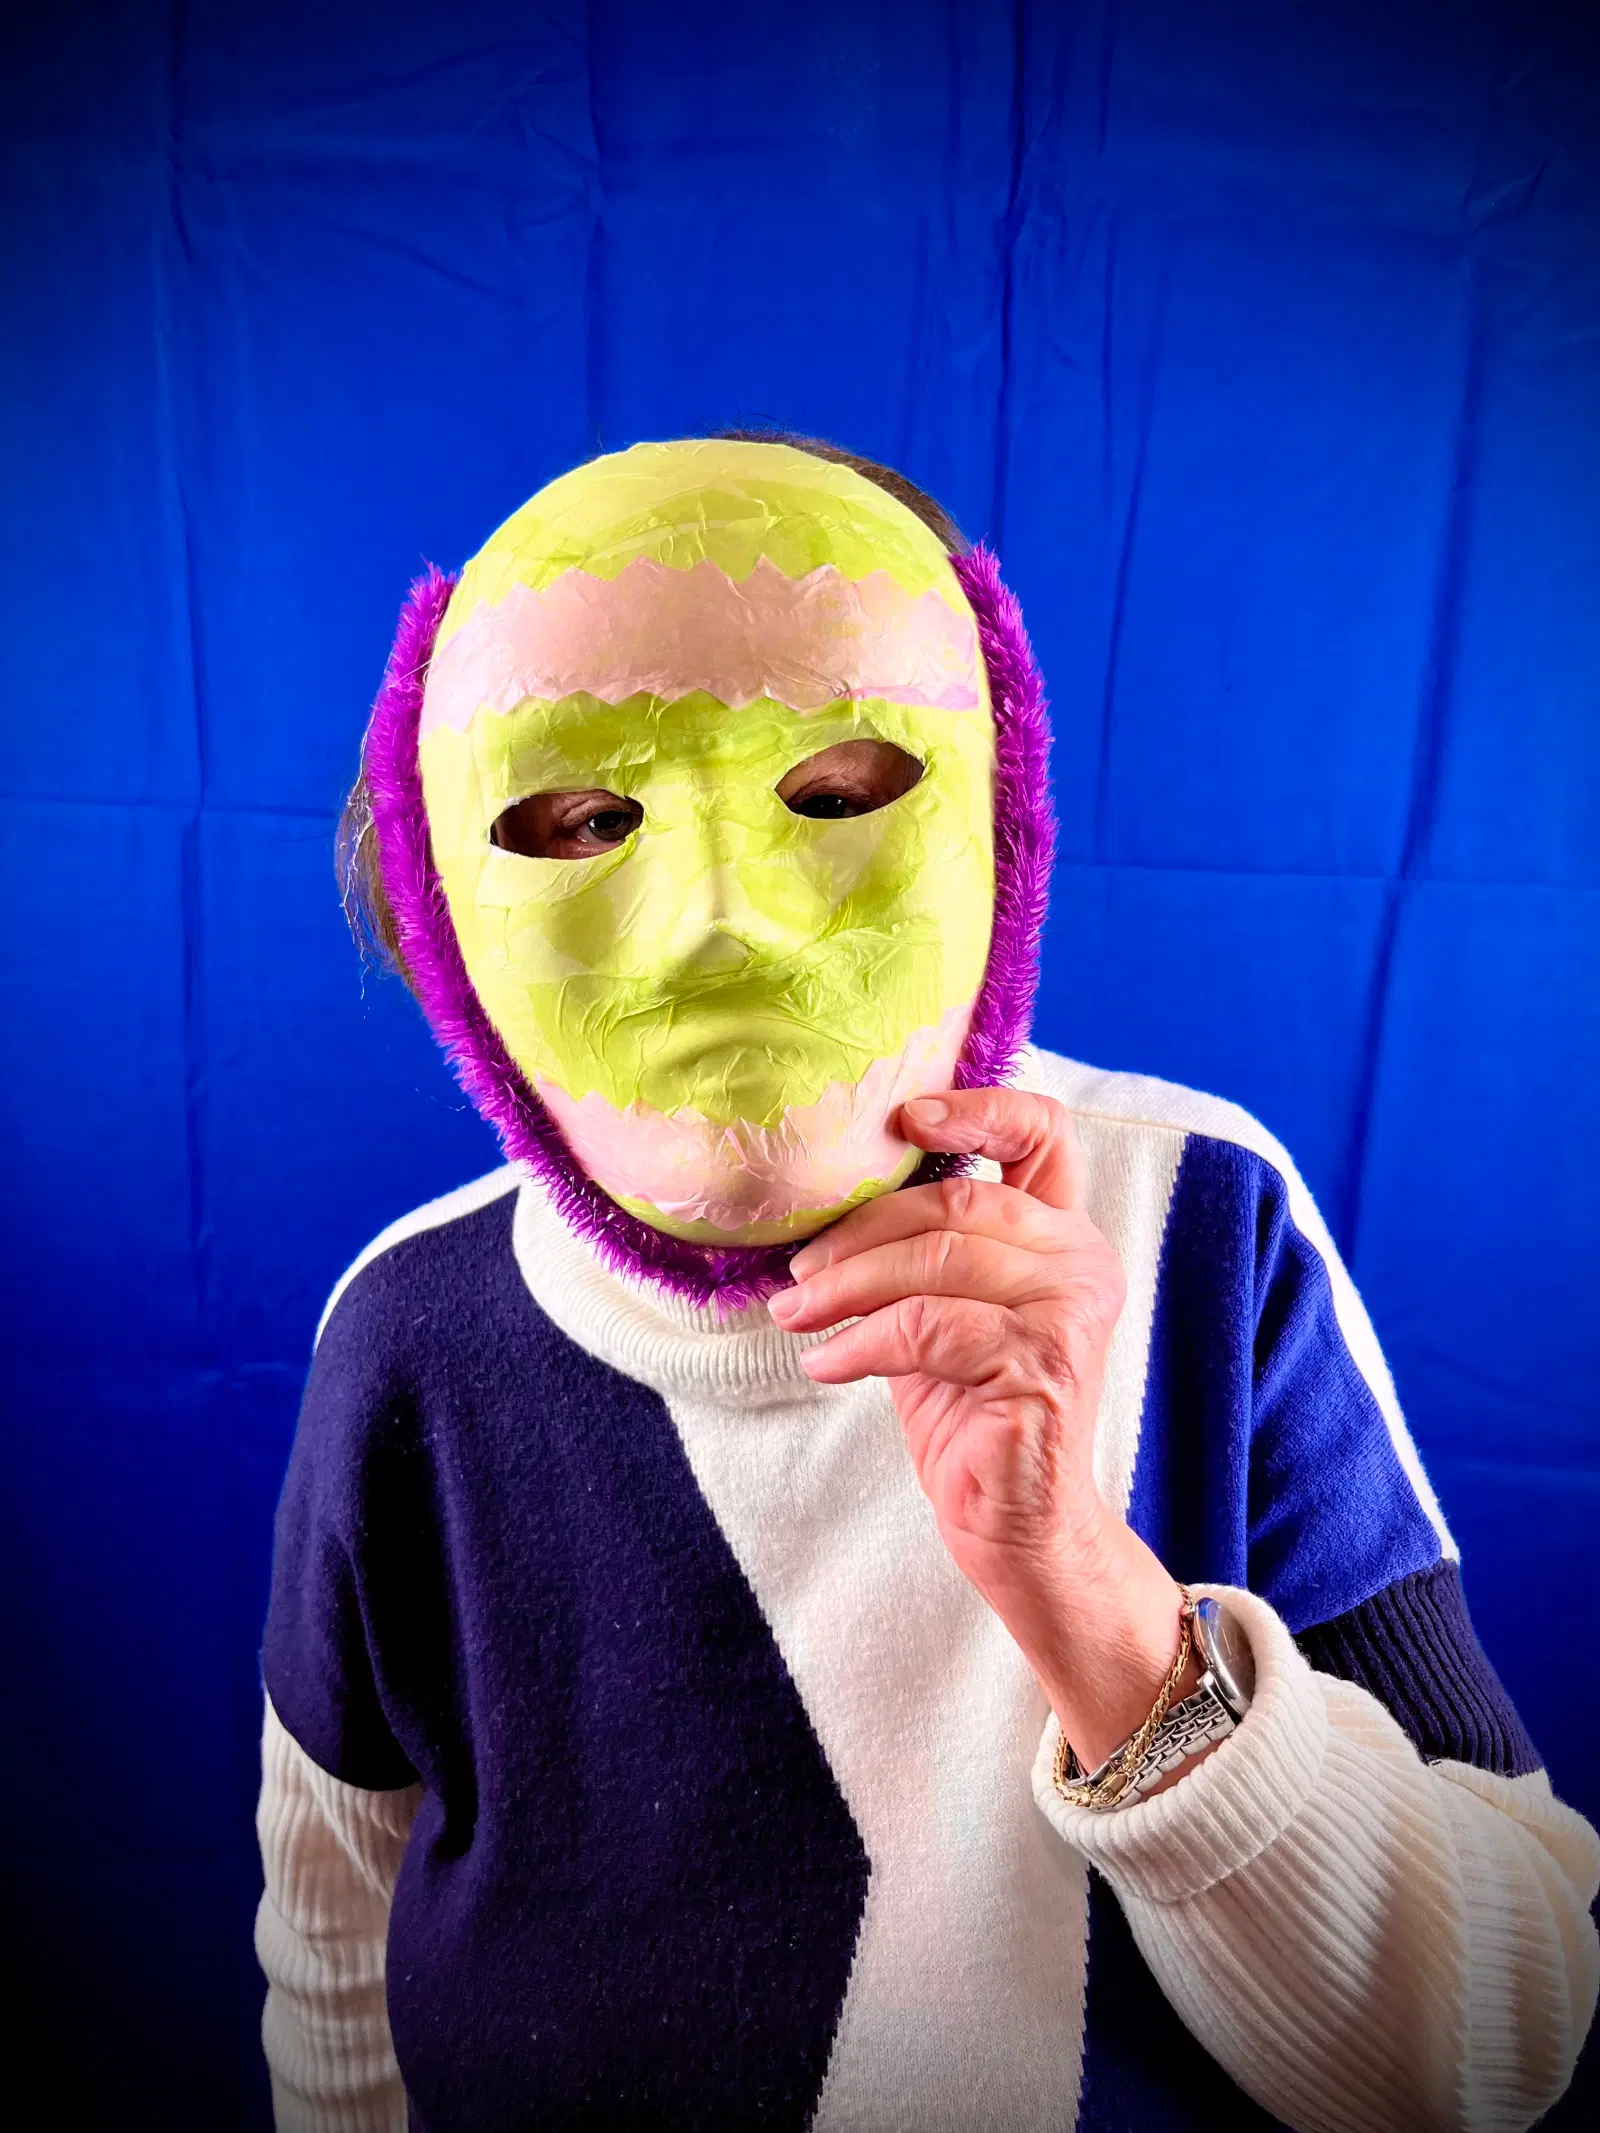 A person in a striped sweater standing against a blue background, wearing a colorful, abstract mask and looking directly at the camera.